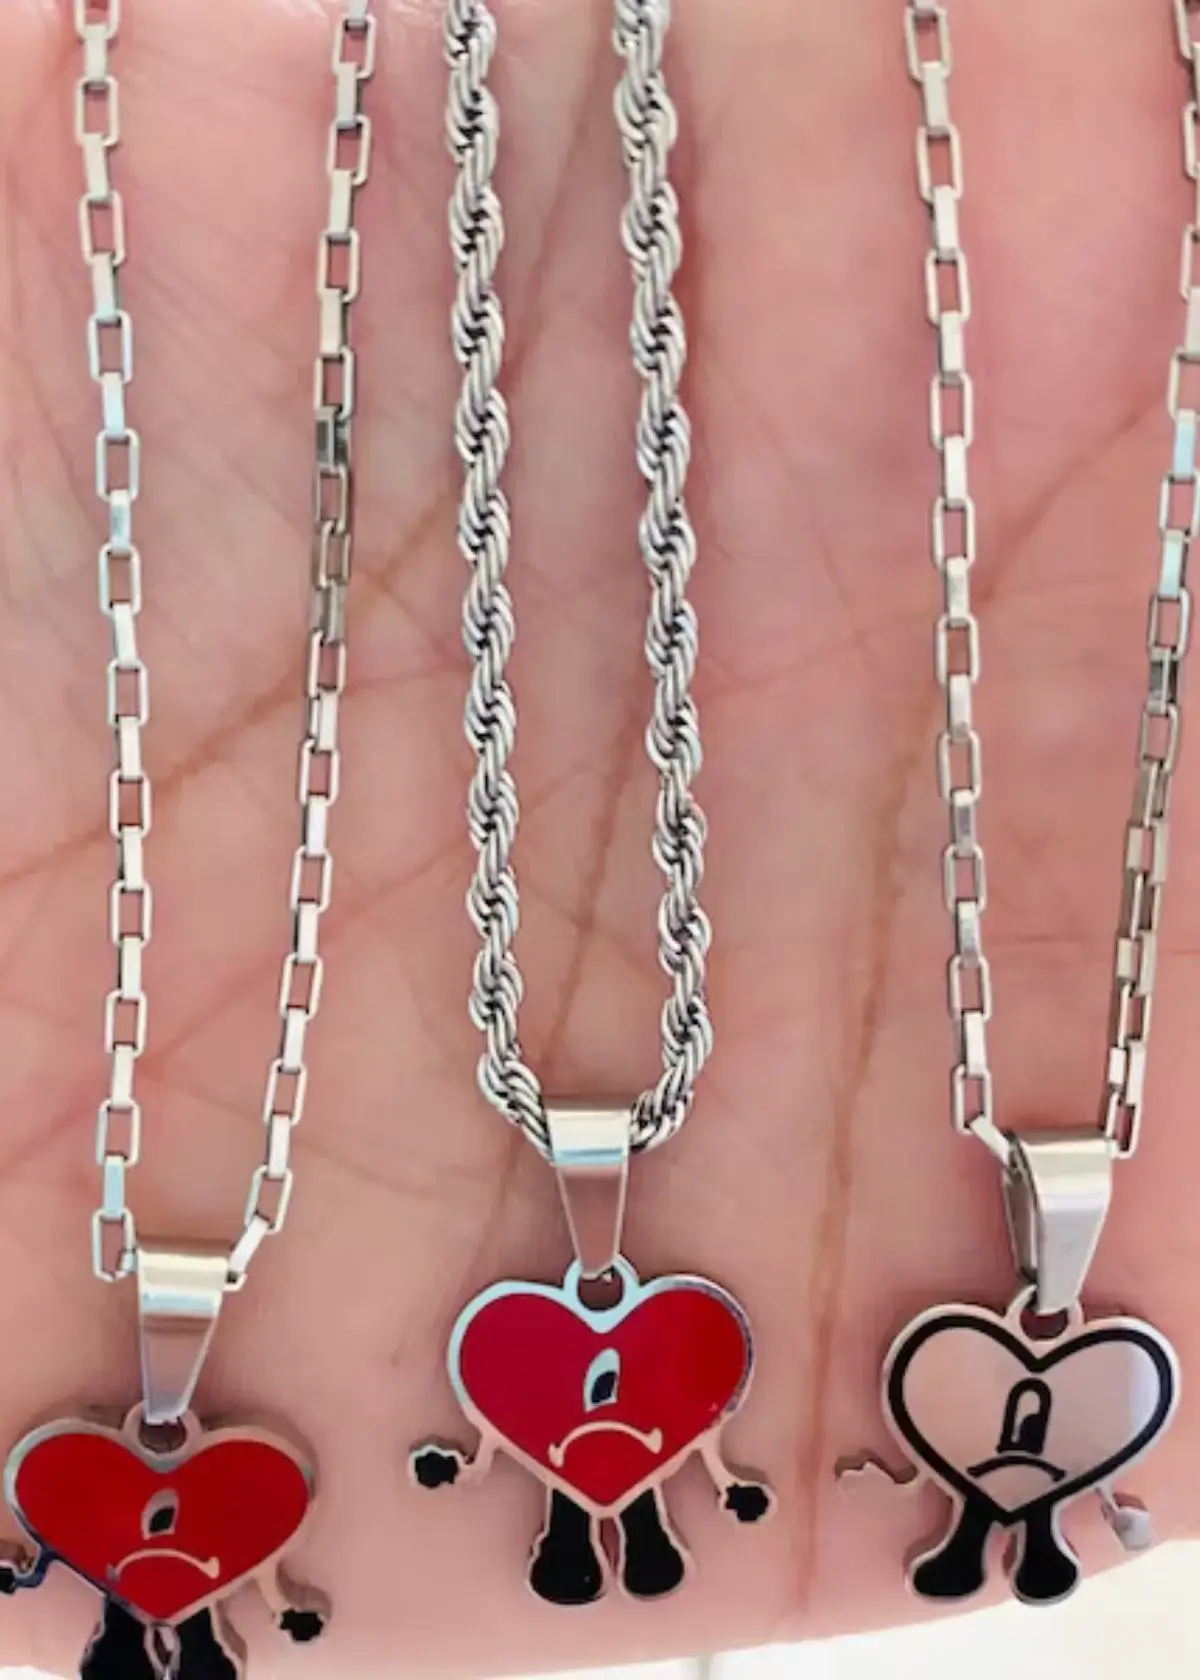 How to choose the right bad bunny necklace?